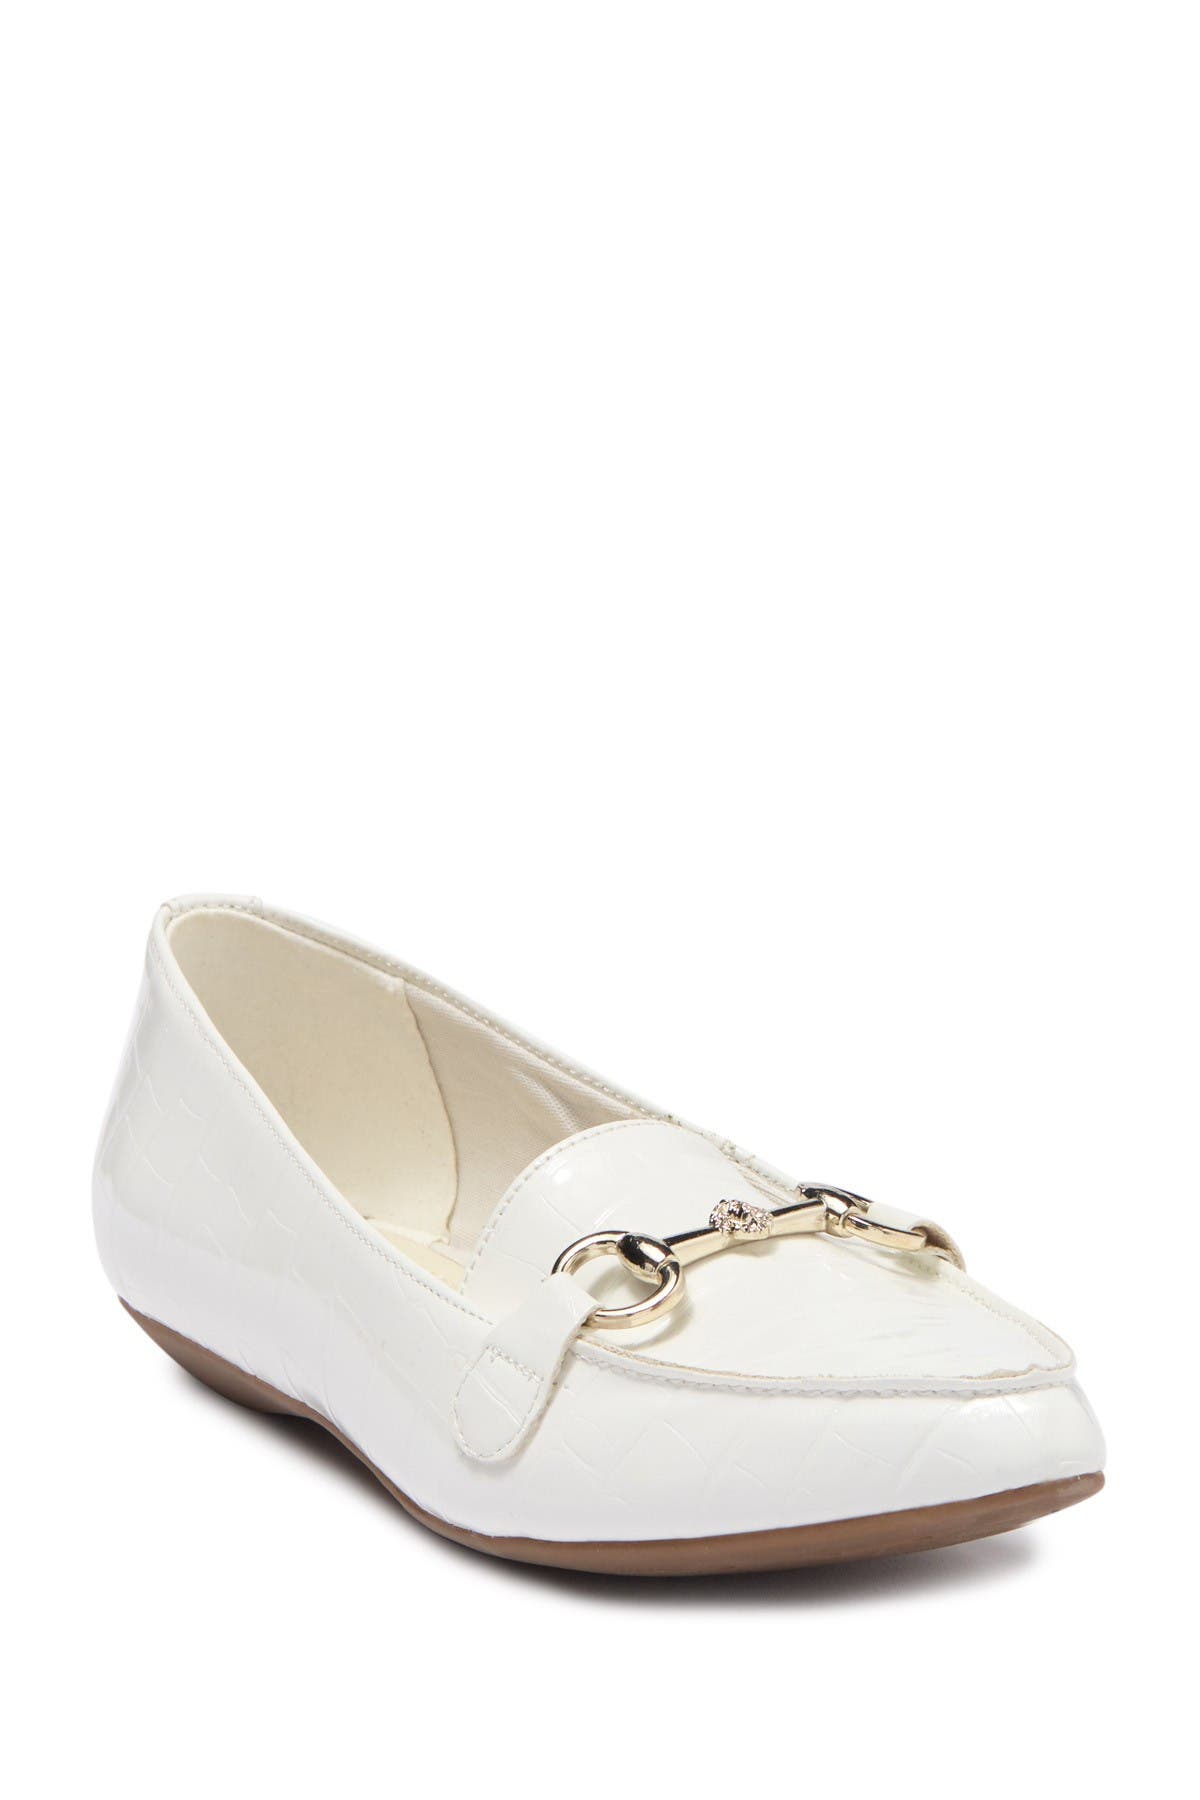 anne klein loafer shoes